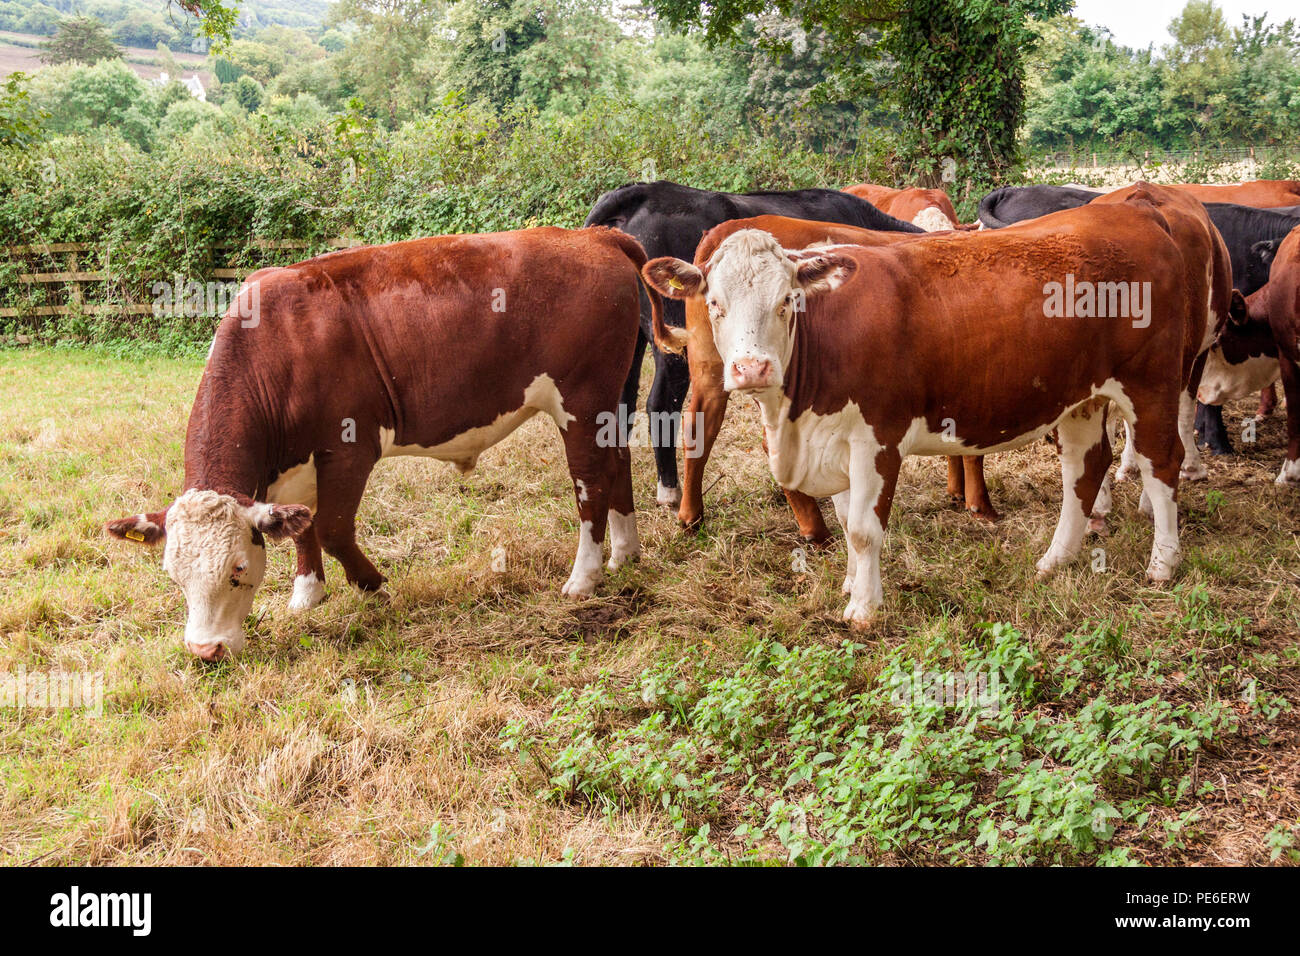 Sidmouth, Devon, 13th Aug 18 Following a weekend of heavy rain, cattle find a little fresh grass coming up where the heat of the summer had  previously scorched the grazing. Photo Central/Alamy Live News Stock Photo